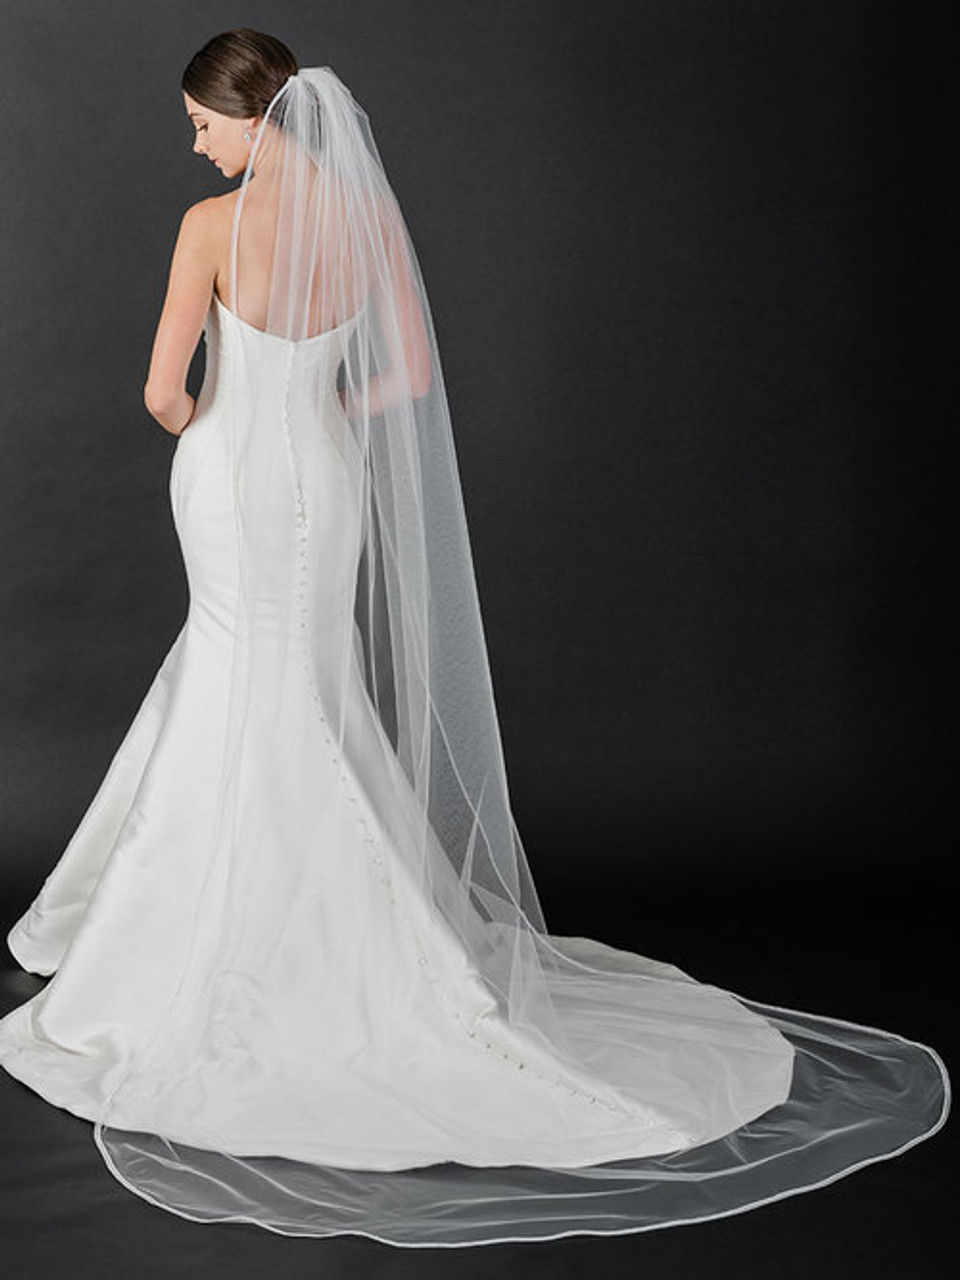 Bel Aire Bridal Veils V7512C - Cathedral veil with horsehair and rhinestone edge